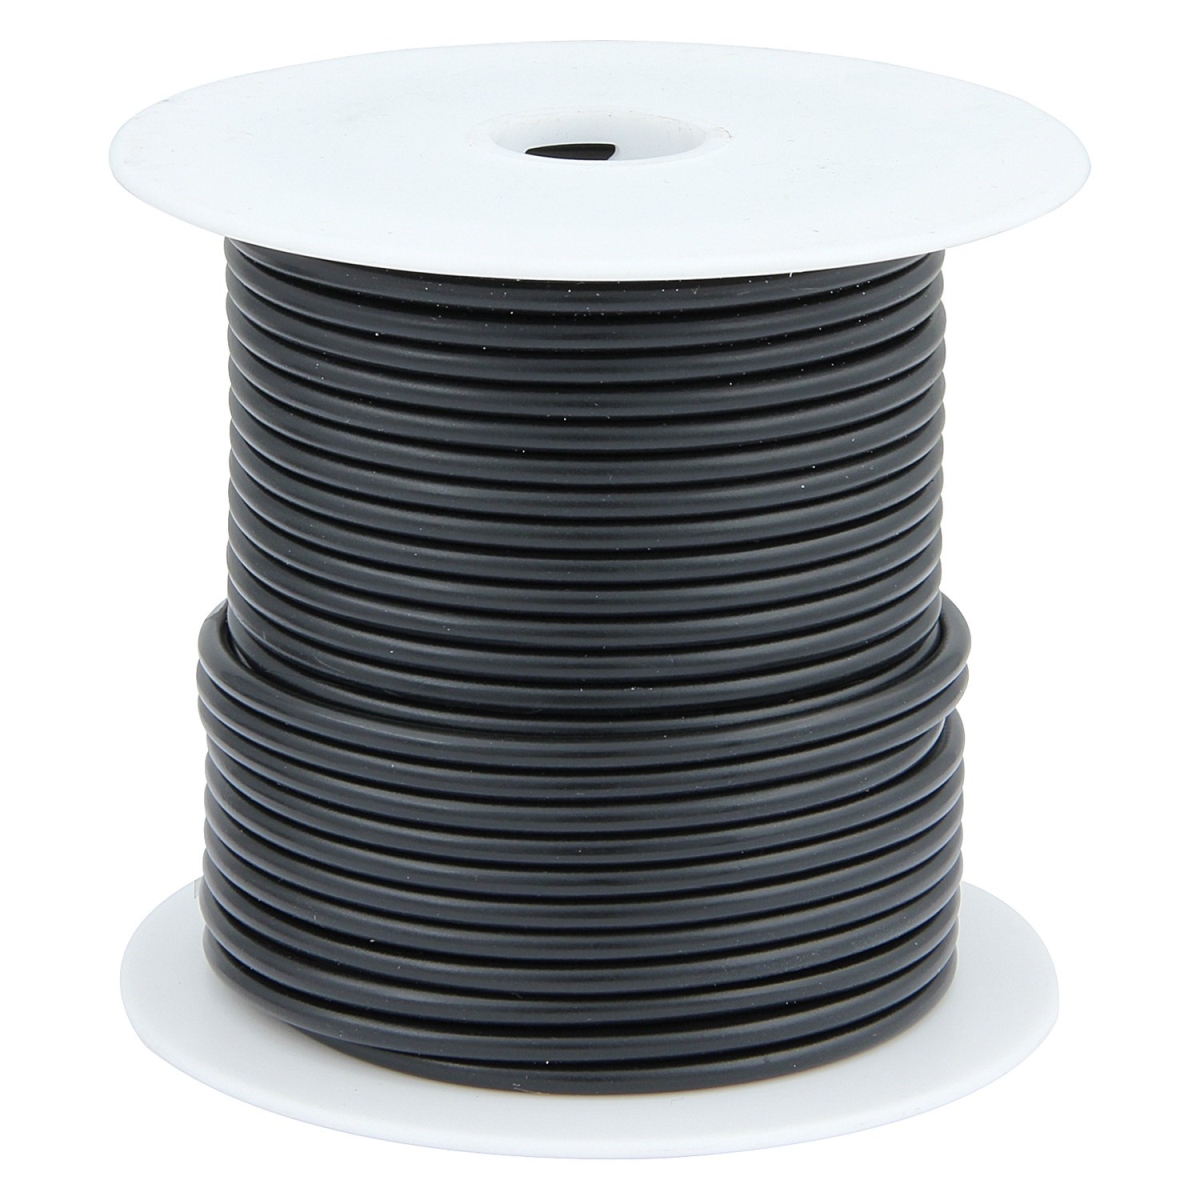 All76511 100 Ft. 20 Awg Black Primary Wire